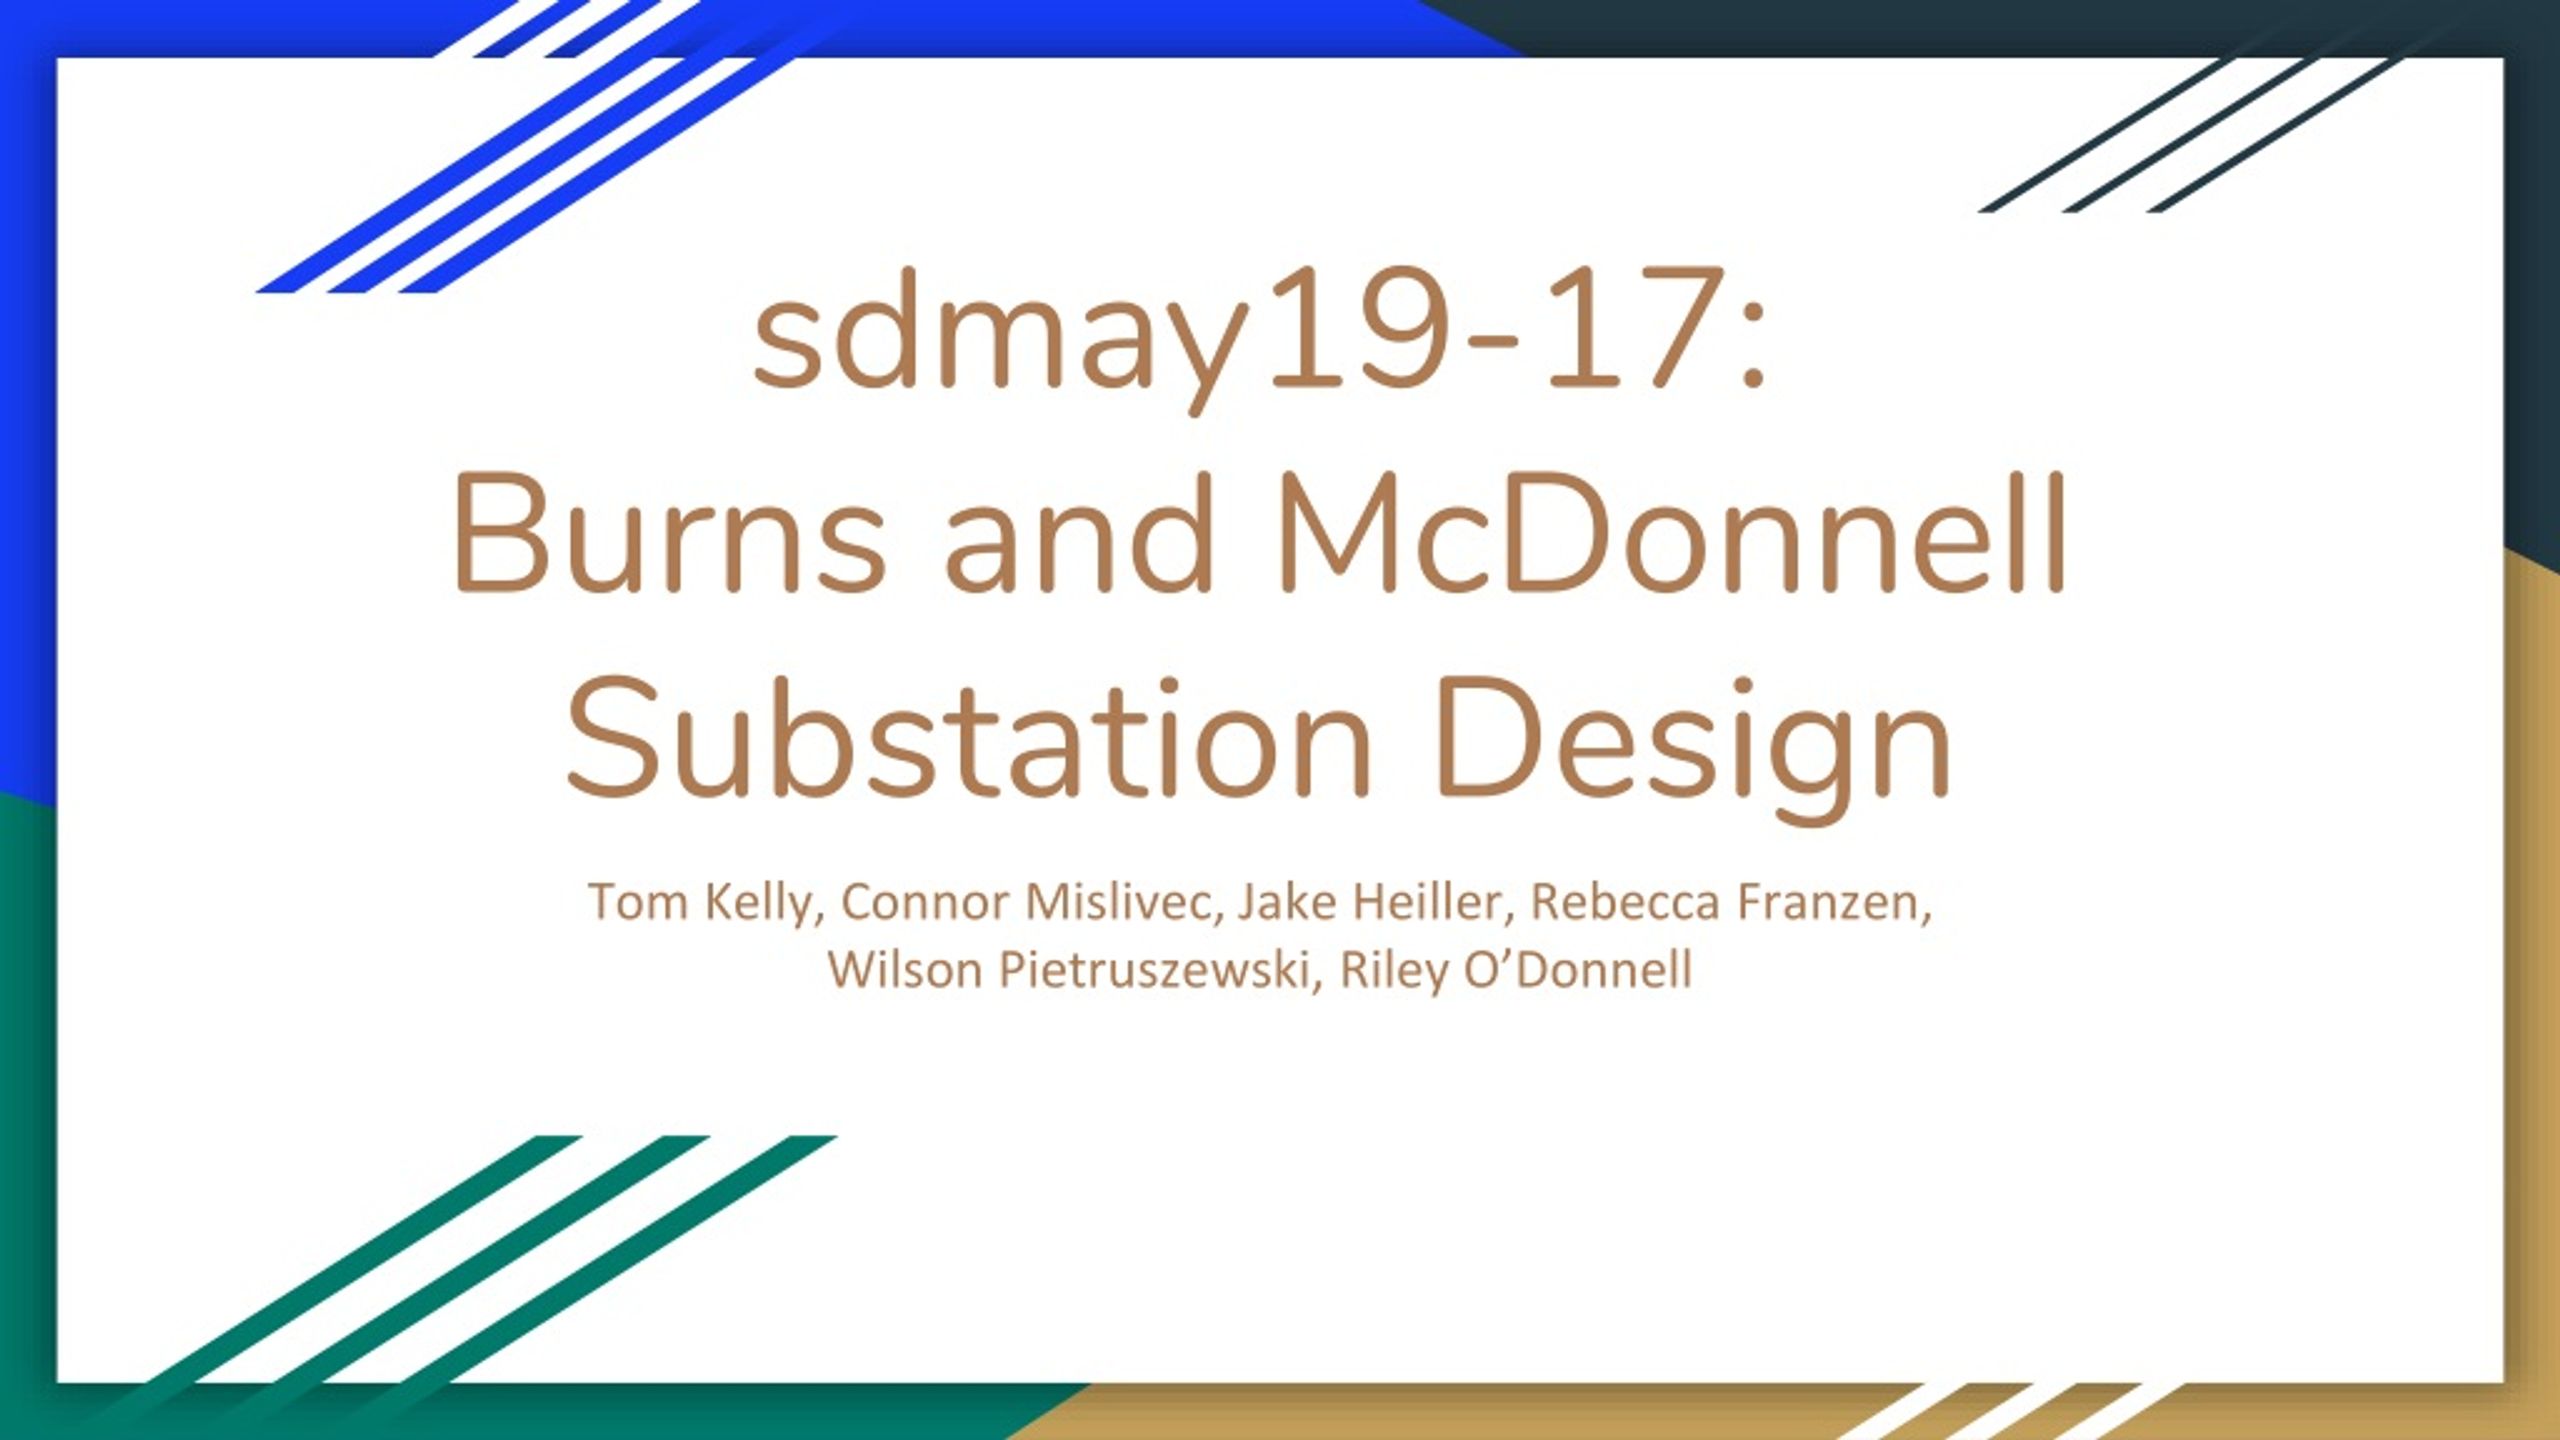 ppt-sdmay19-17-burns-and-mcdonnell-substation-design-powerpoint-presentation-id-487469